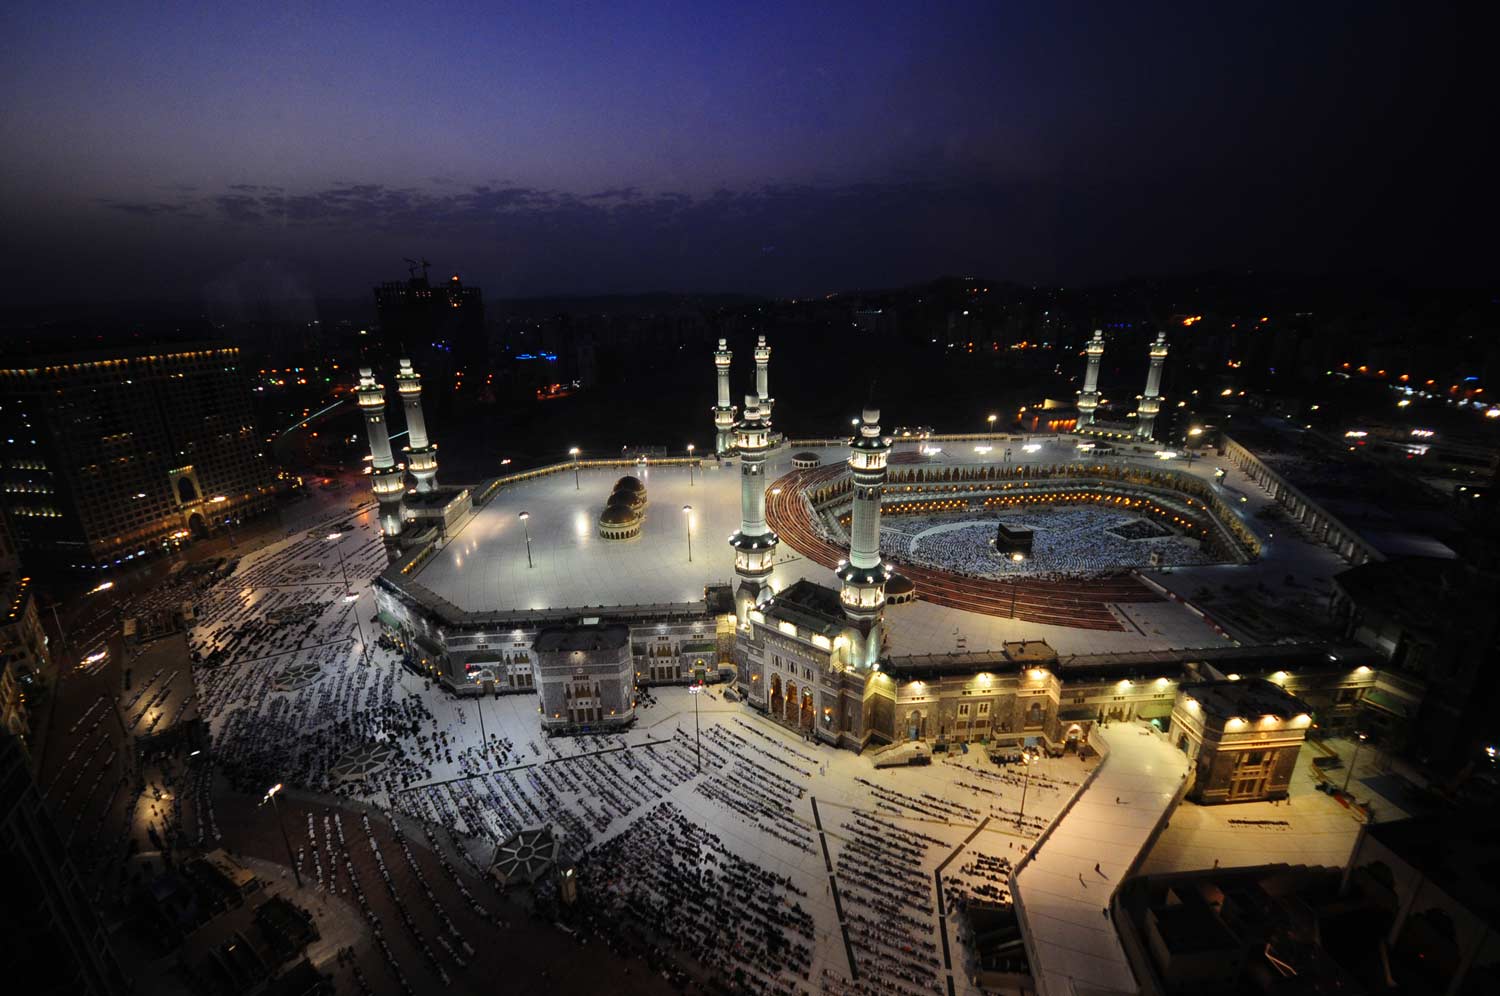 Can You Offer Some Tips on Maximizing the Benefits of Hajj?